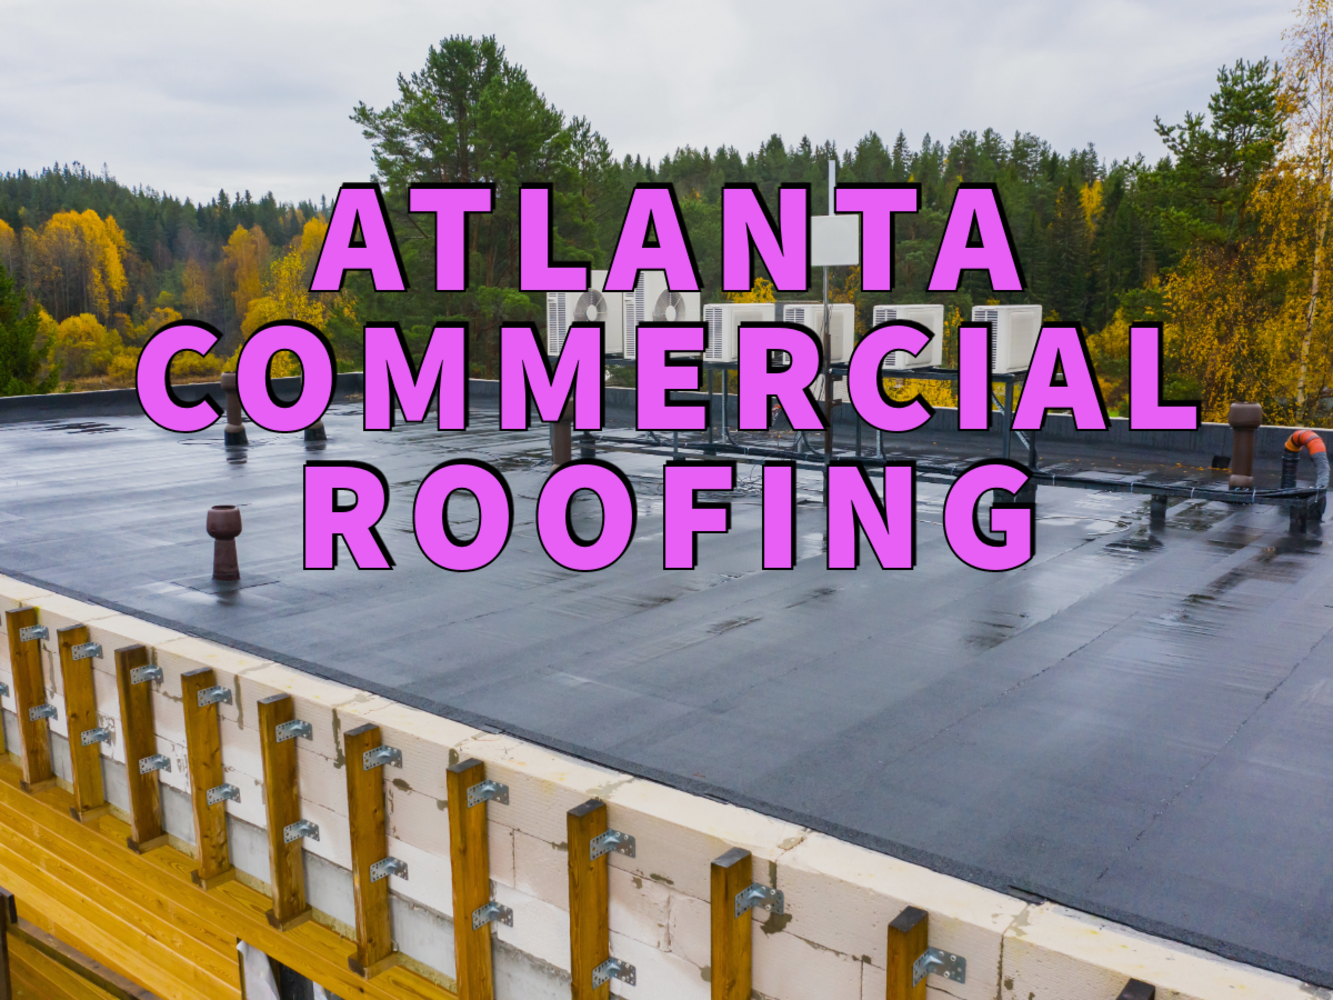 Atlanta commercial roofing written in purple over black flat commercial roof